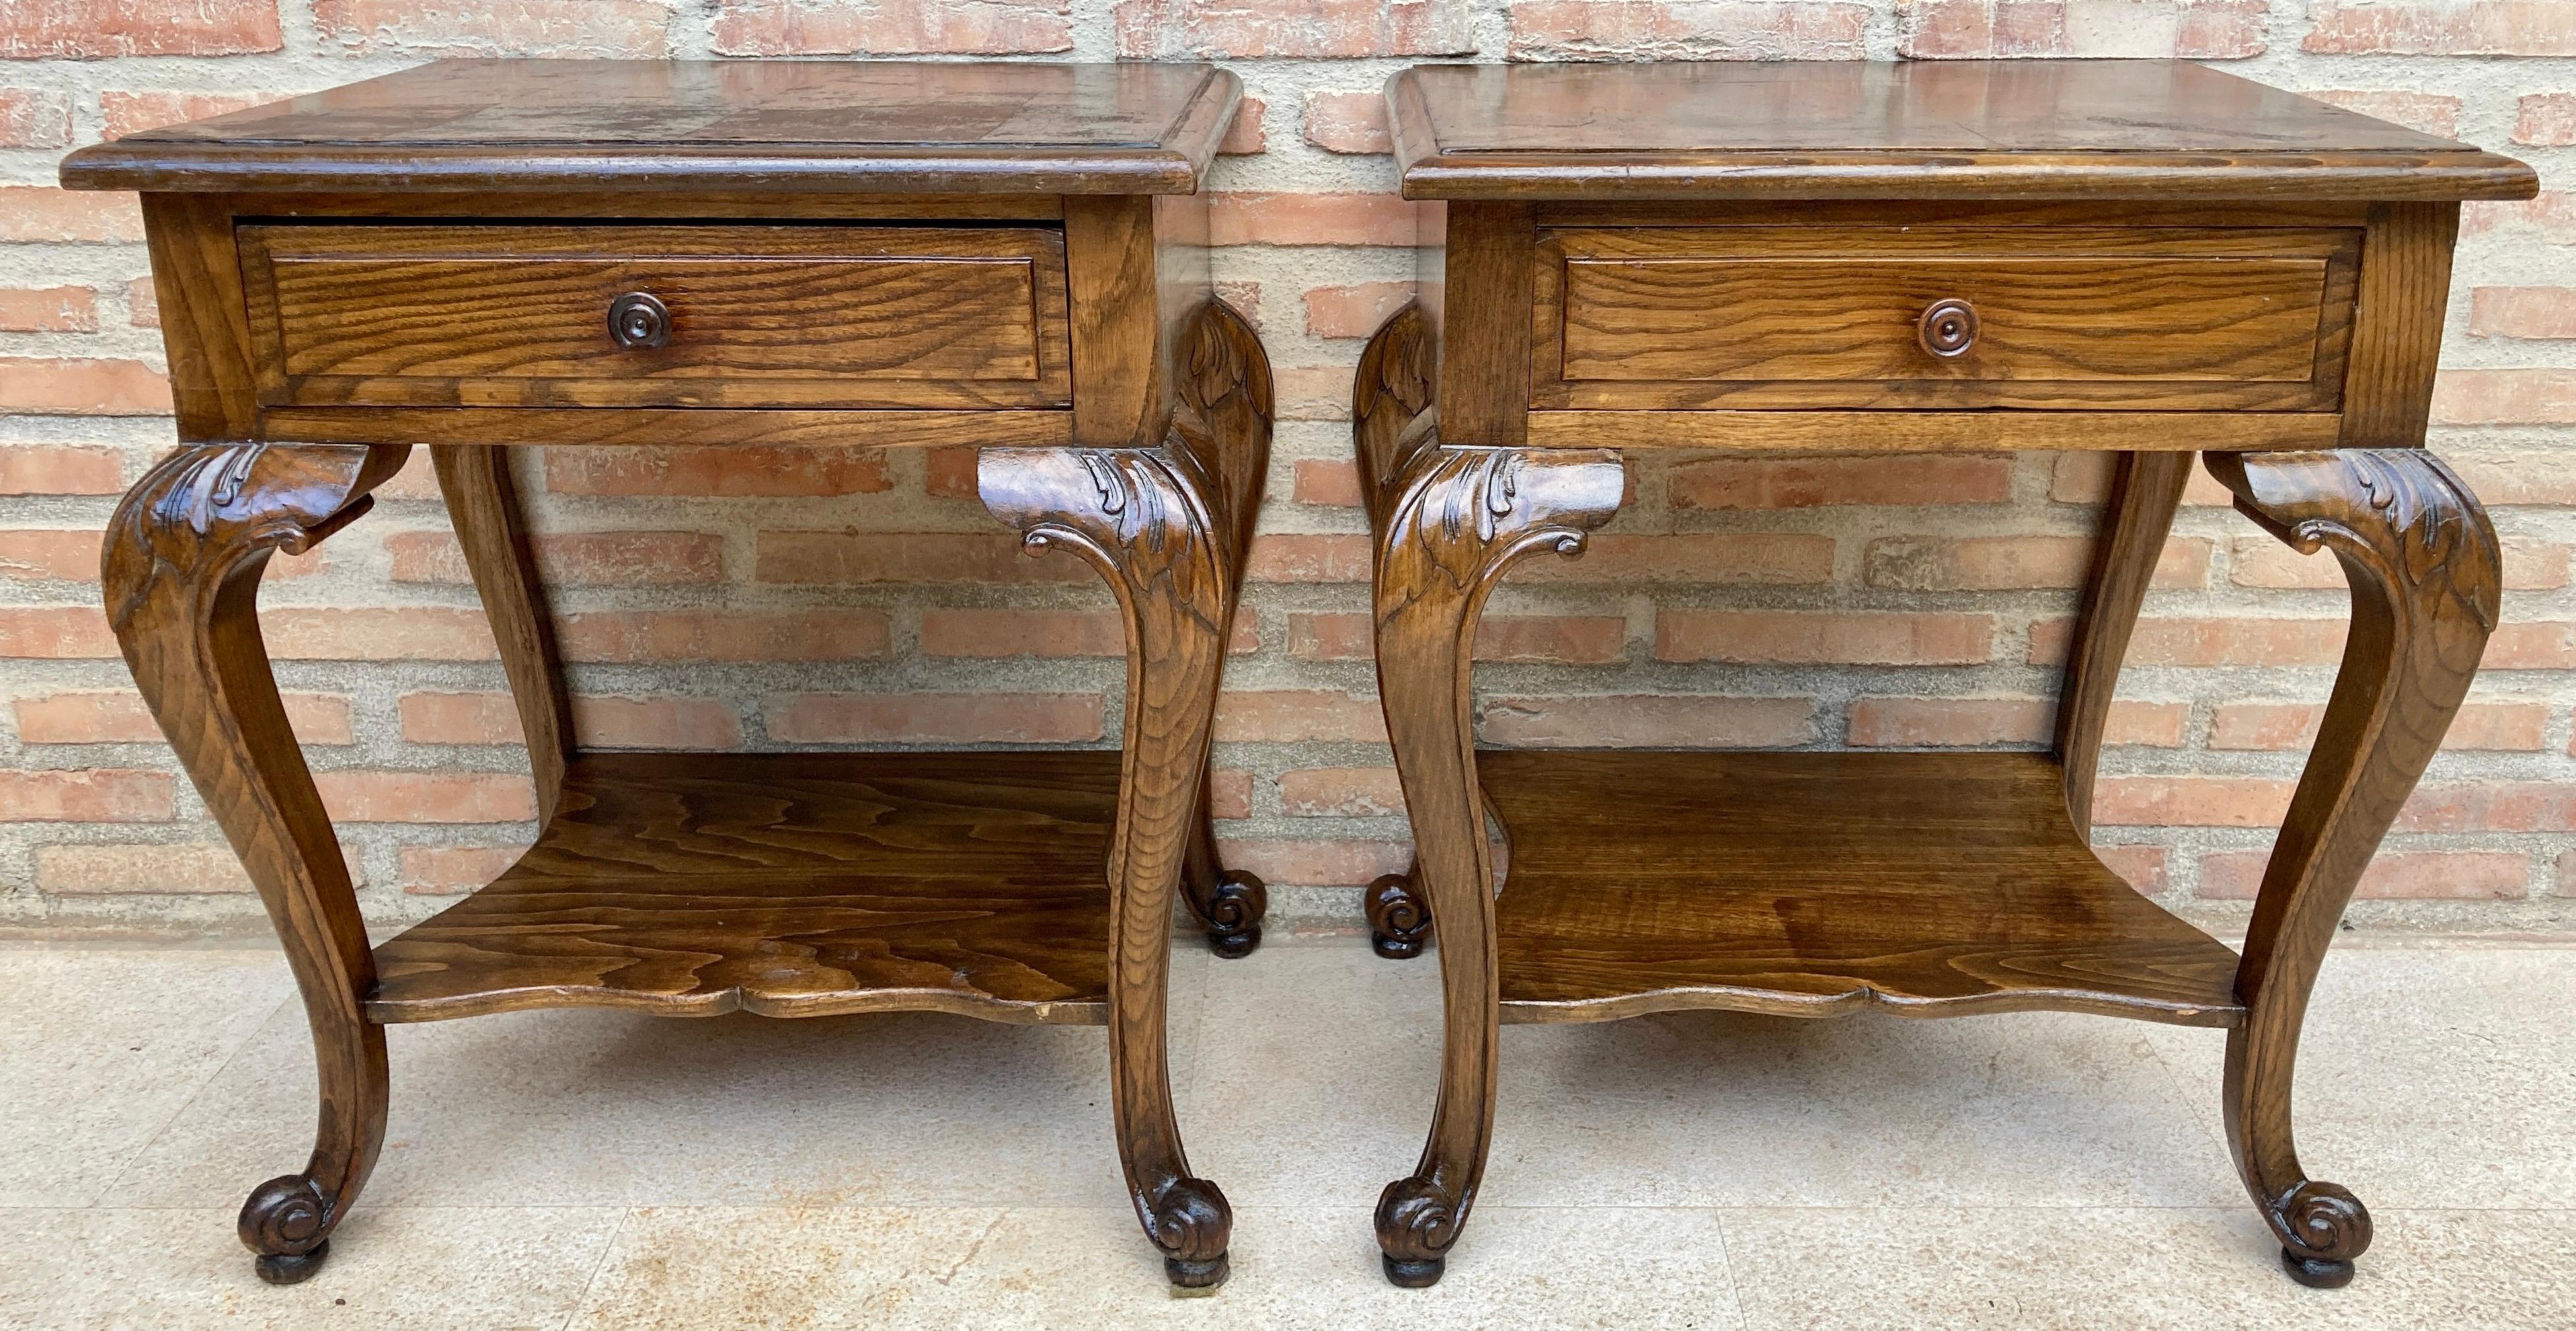 20th Century French Louis XV Style Walnut Bedside Tables with Drawer and Open Shelf, 1930s, S For Sale